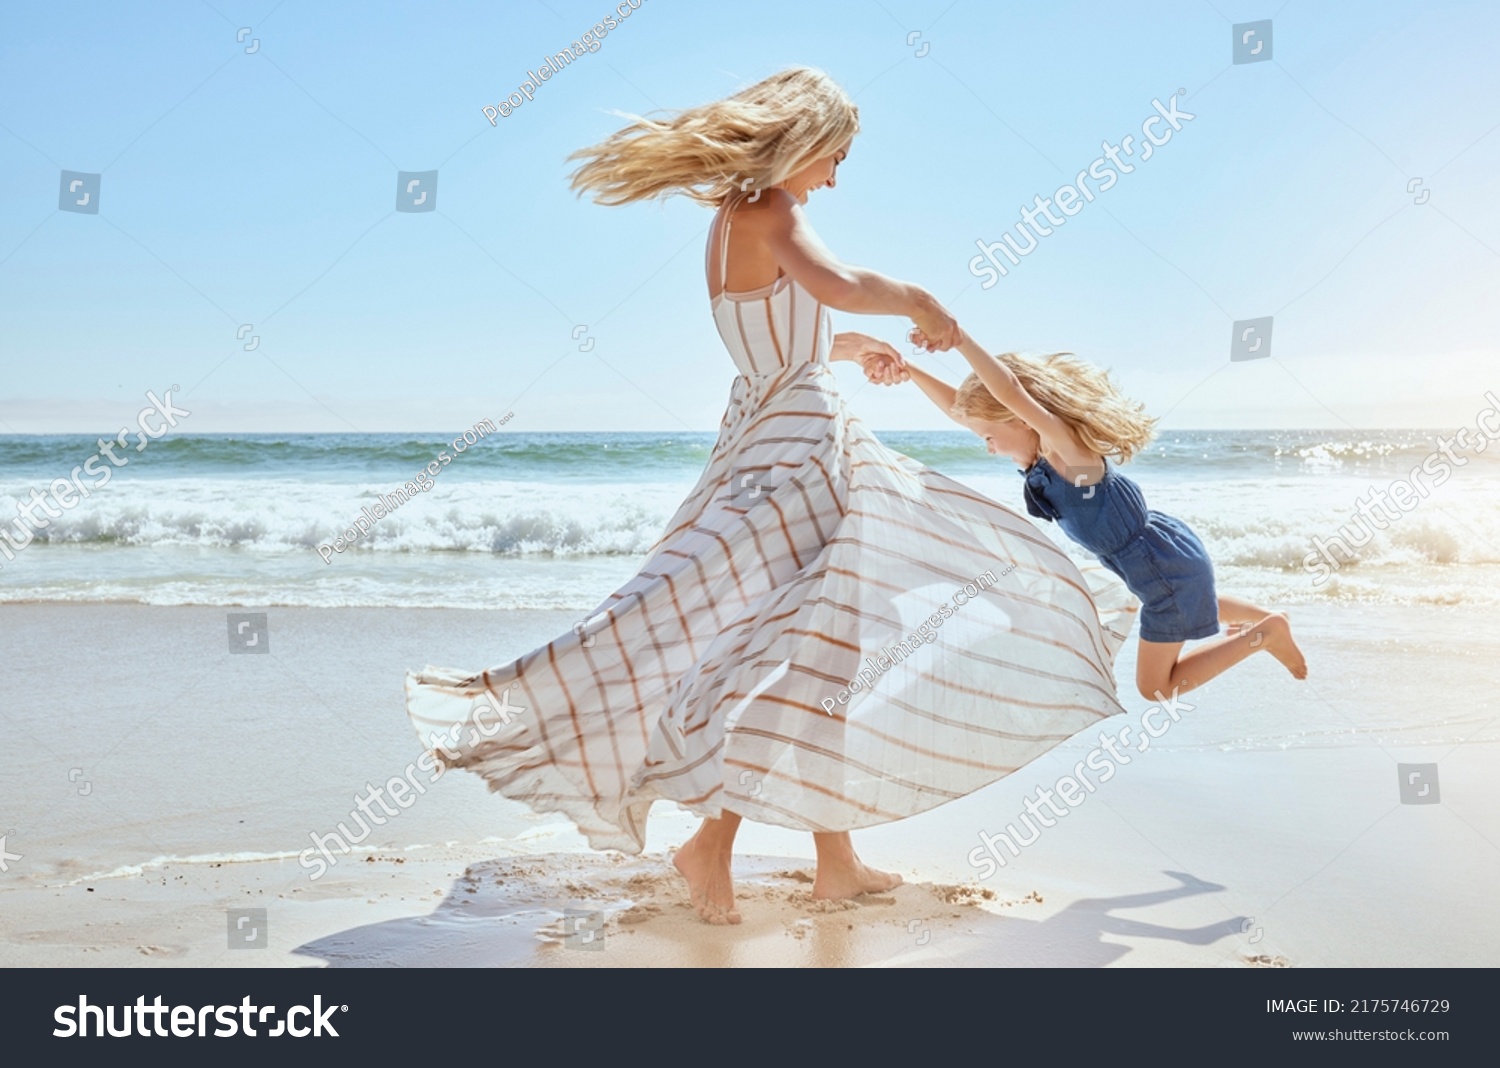 Happy mother swinging and spinning cute daughter in circles by the arms at the beach. Playful, energetic and joyful kid having fun while bonding with mom on sunny summer vacation outdoors #2175746729